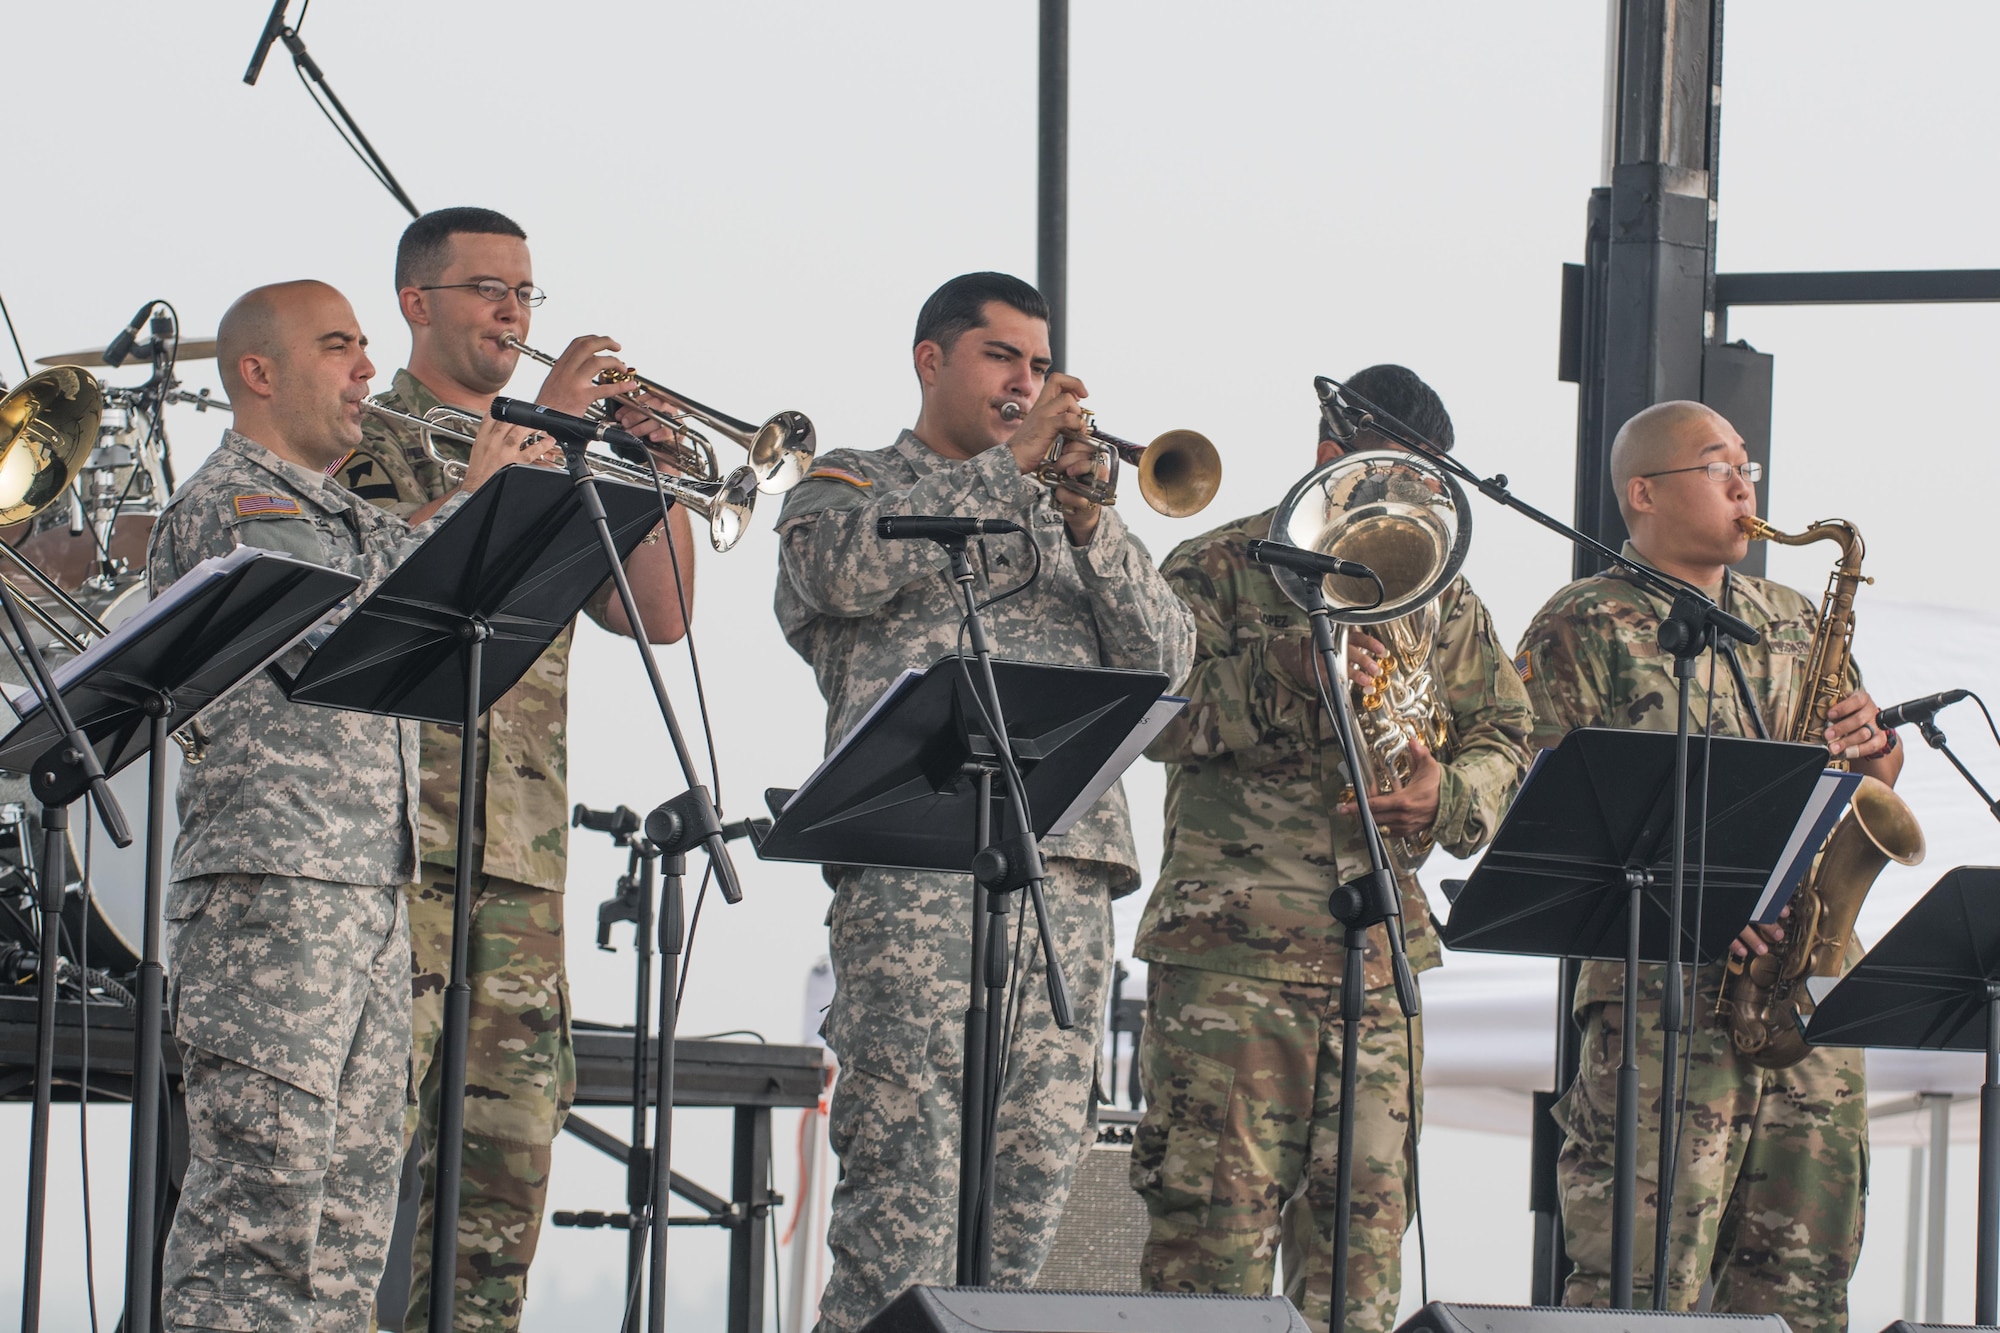 U.S. Army members of the 8th Army Band perform during Air Power Day 2016 at Osan Air Base, Republic of Korea, Sept. 25, 2016. The 8th Army Band performs across the peninsula to provide morale and community integration with military members. (U.S. Air Force photo by Senior Airman Dillian Bamman)